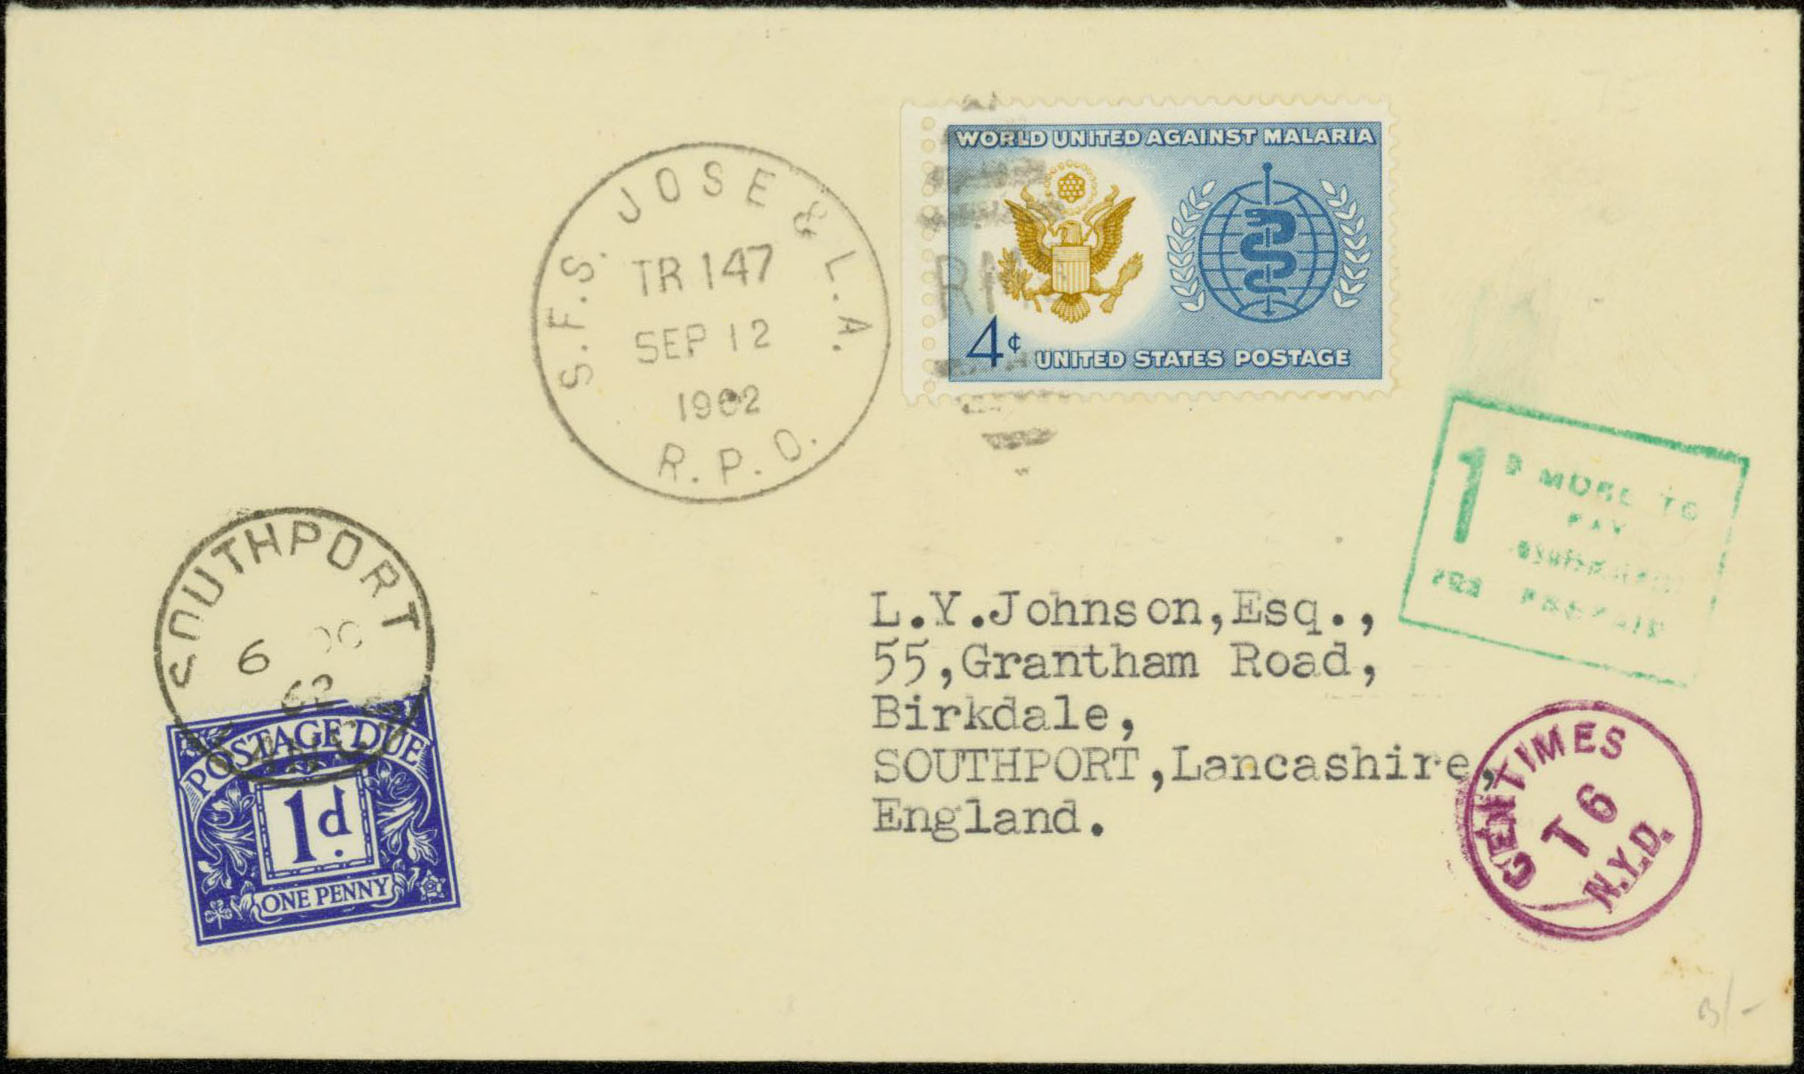 1962, September 12th, S.F.S. Jose and L.A., RPO to England. International Printed Matter Rate.<br />(Short paid 1¢, double the deficiency, 2¢. 2 centimes = 1¢, 6 centimes due or 1d)